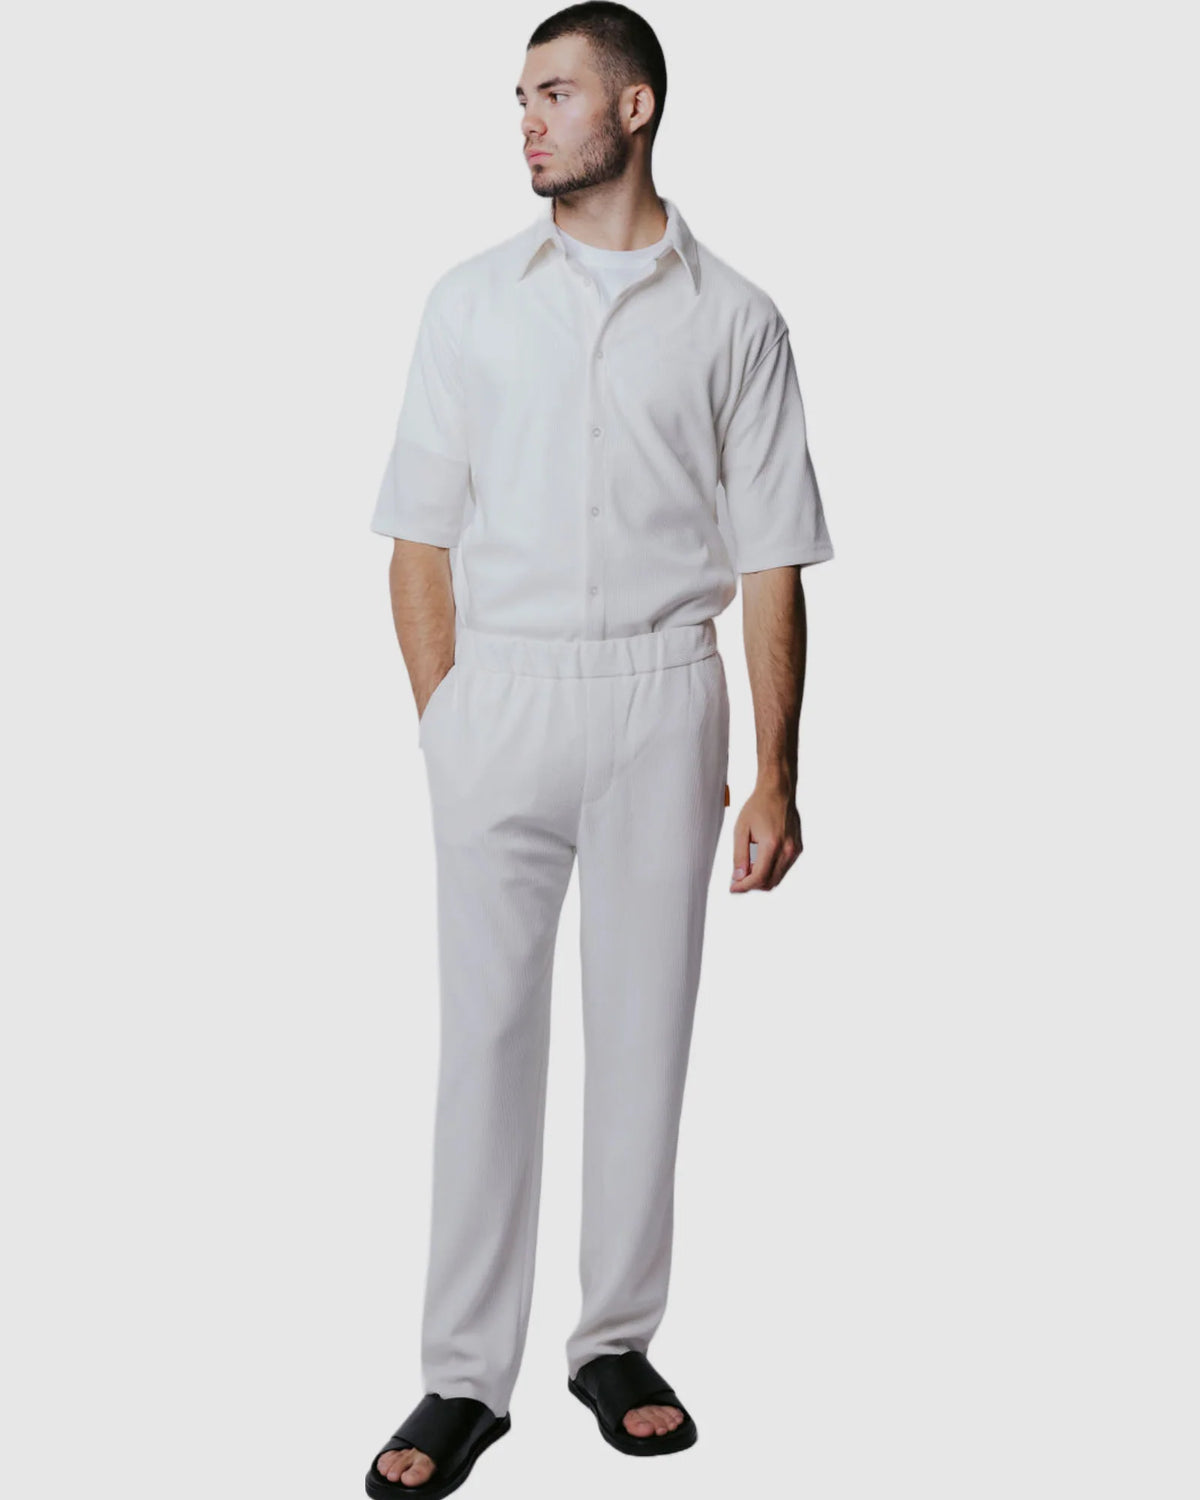 Justin Cassin Abade Pleated Pants in White Color 2